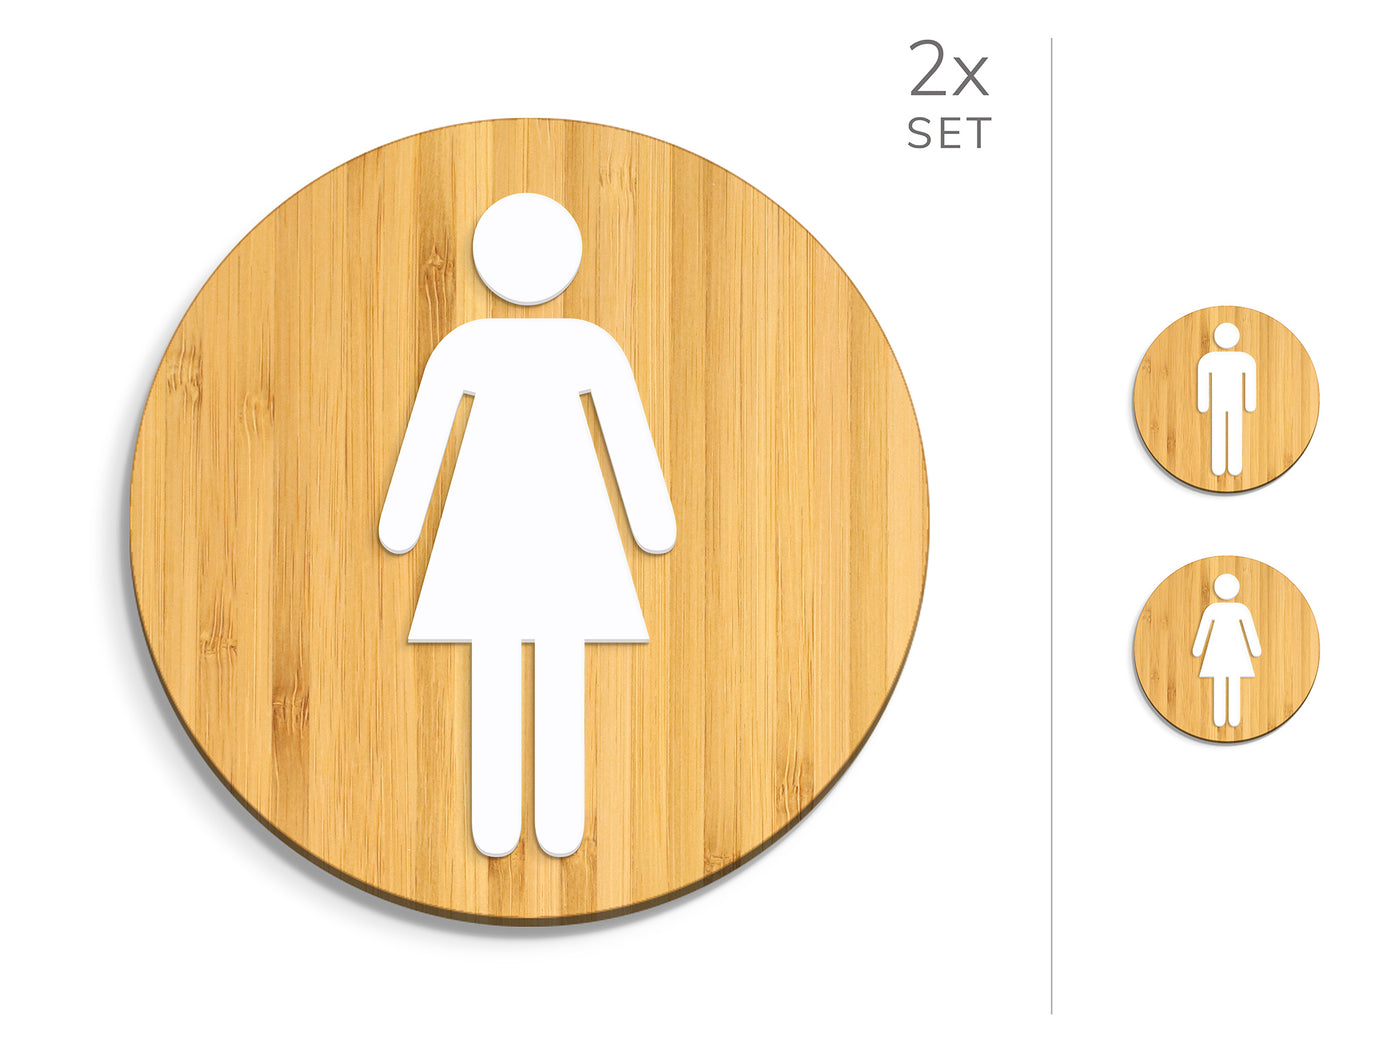 Classic, 2x Round Base - Restroom Signs Set - Man, Woman